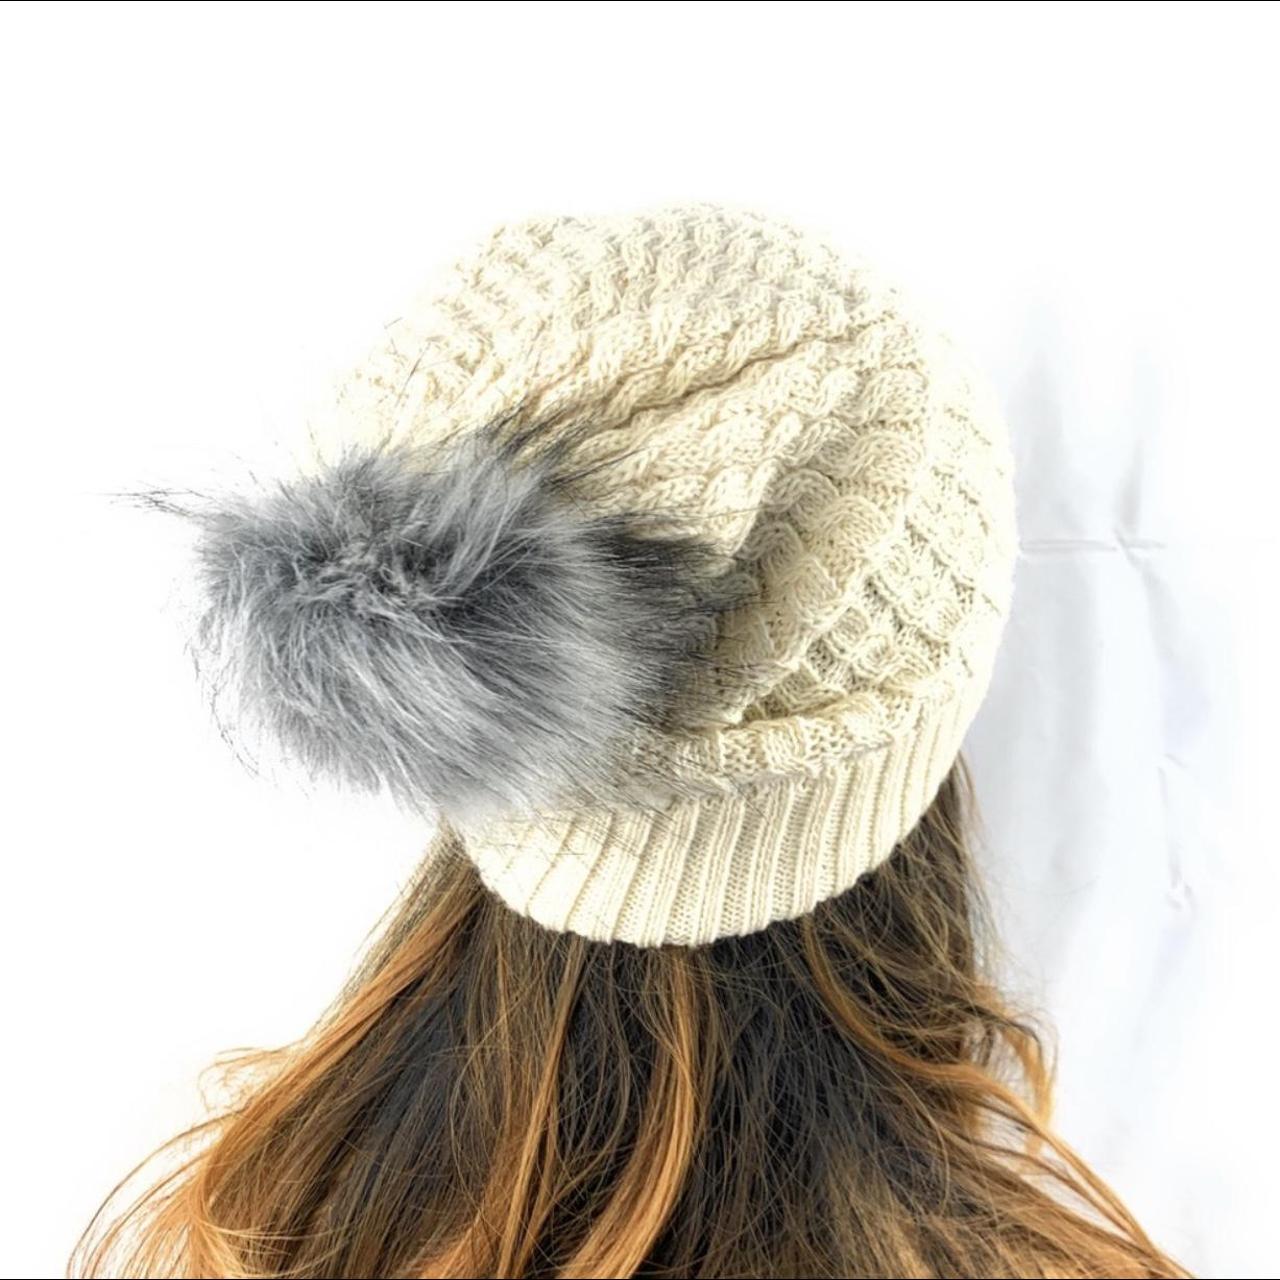 Product Image 2 - Slouch Beanie With Pom Ivory
This